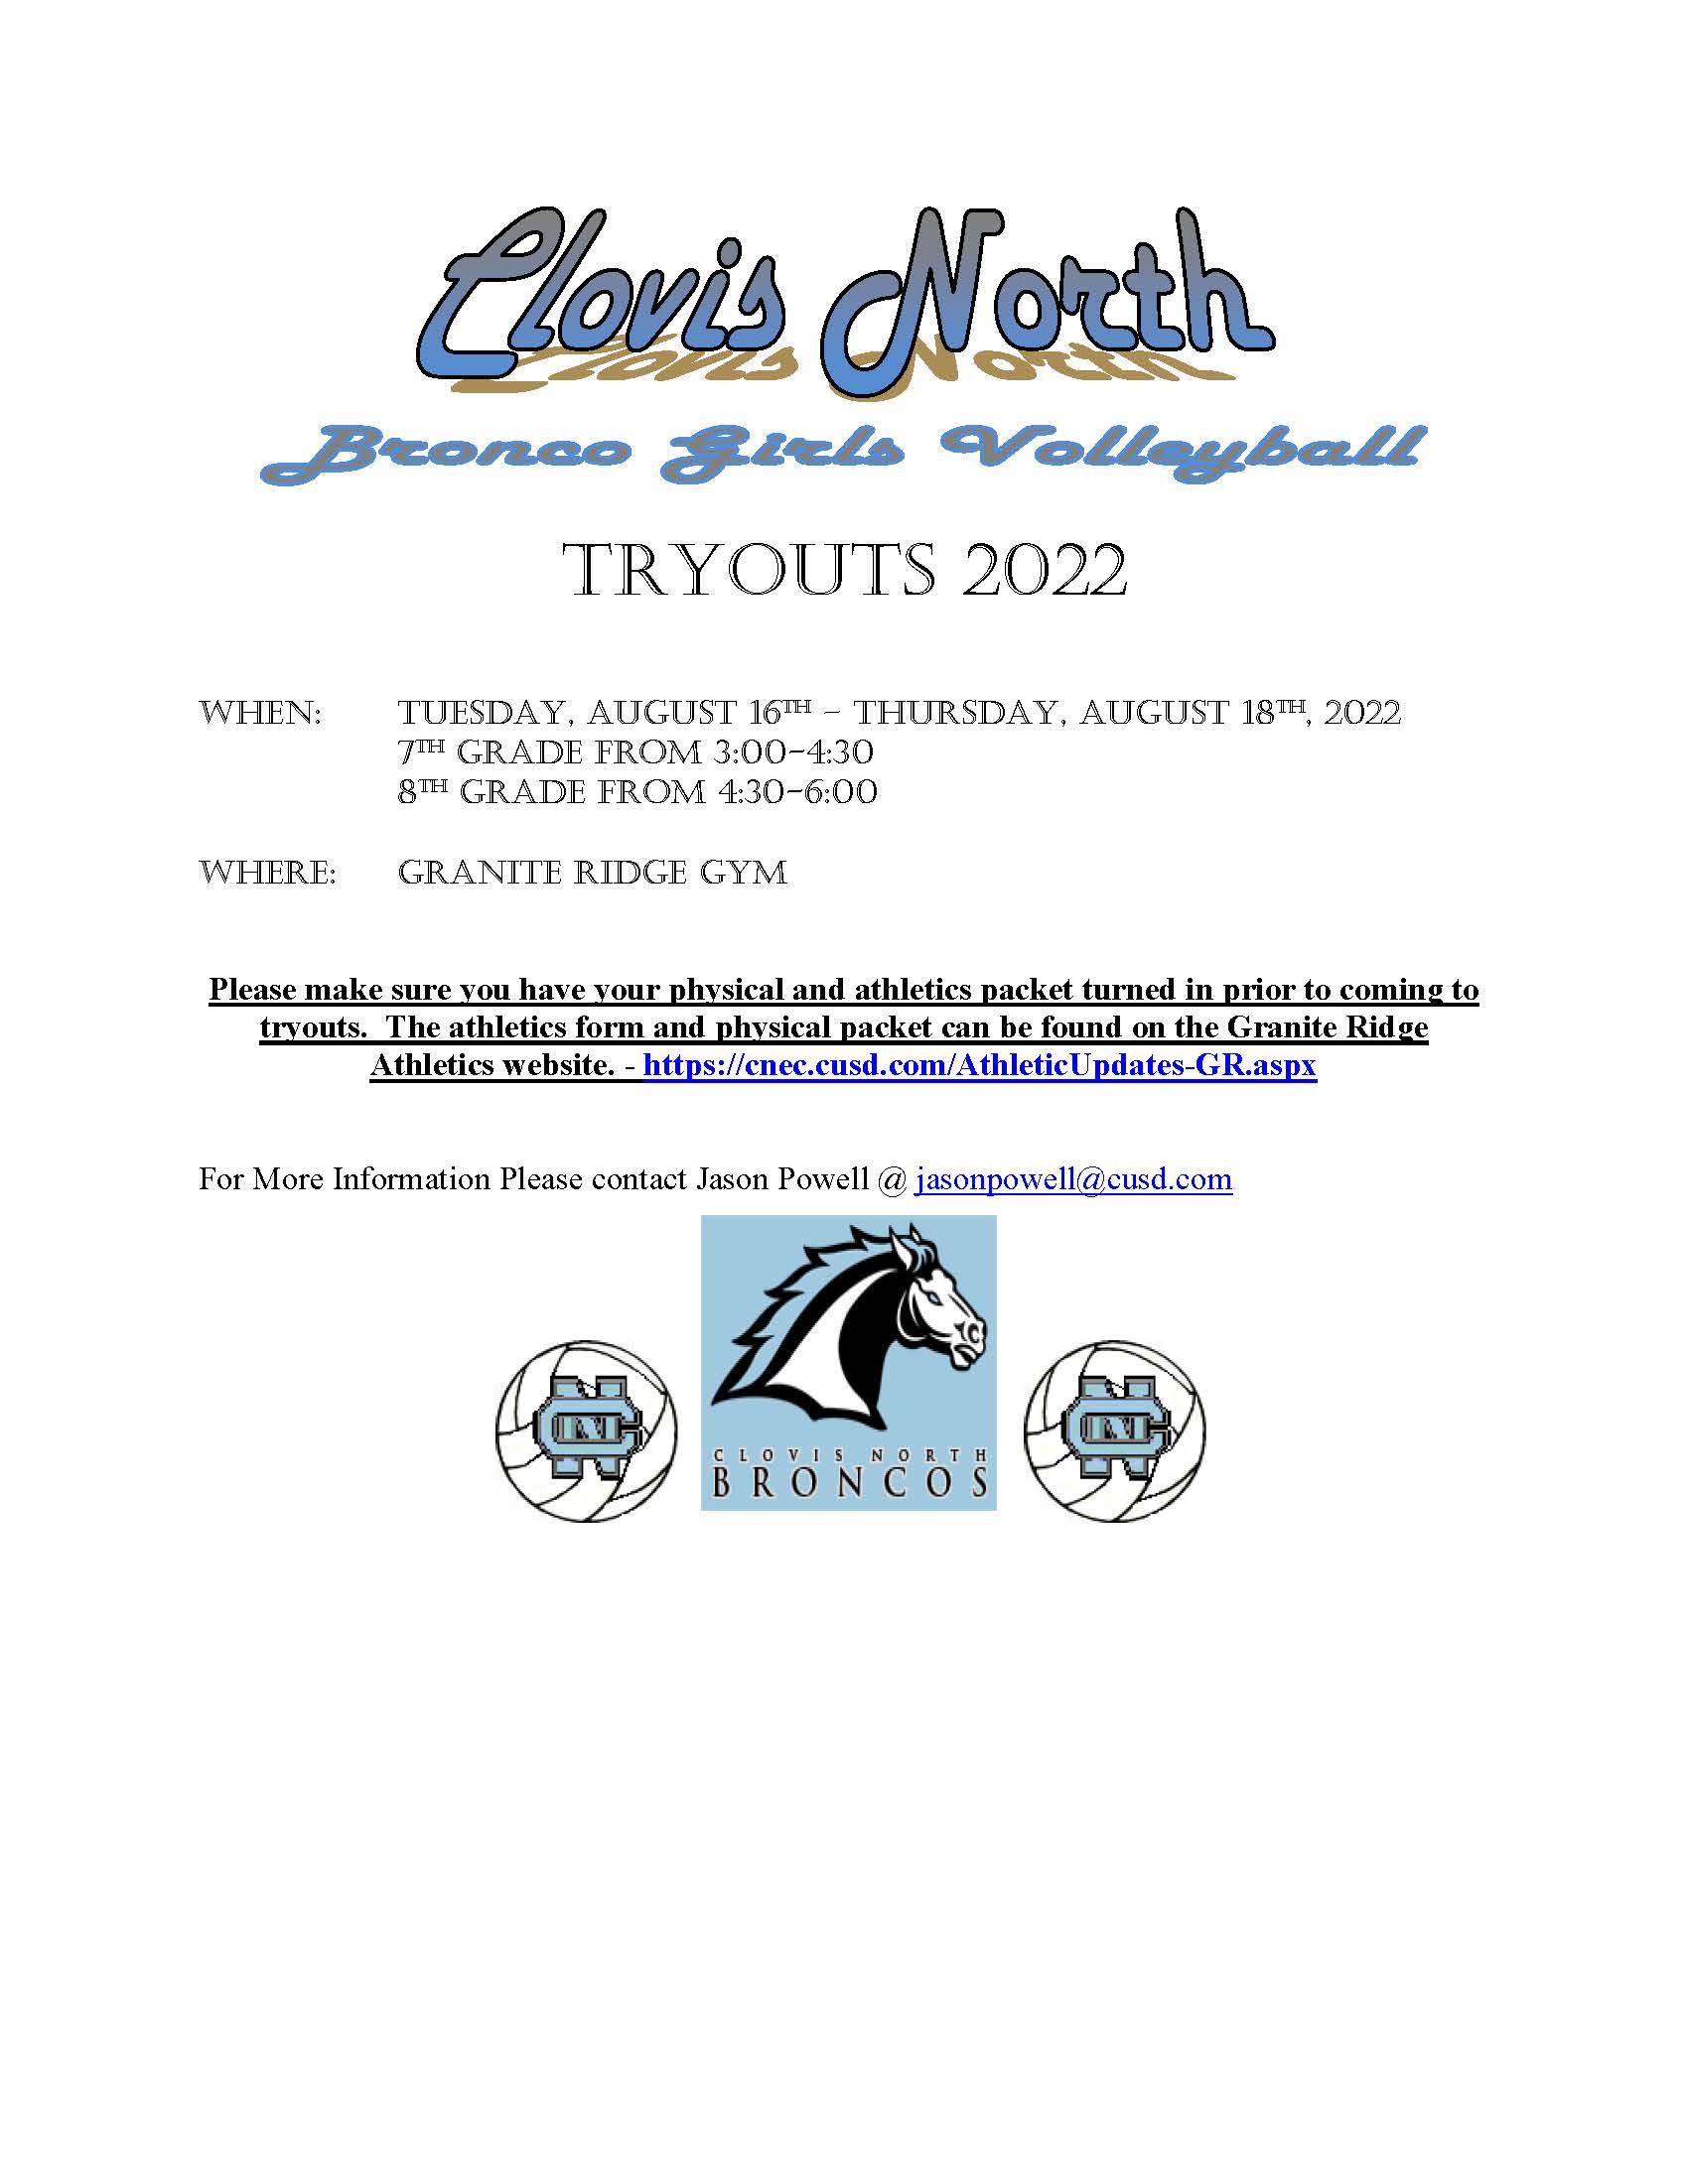 GVB tryout information